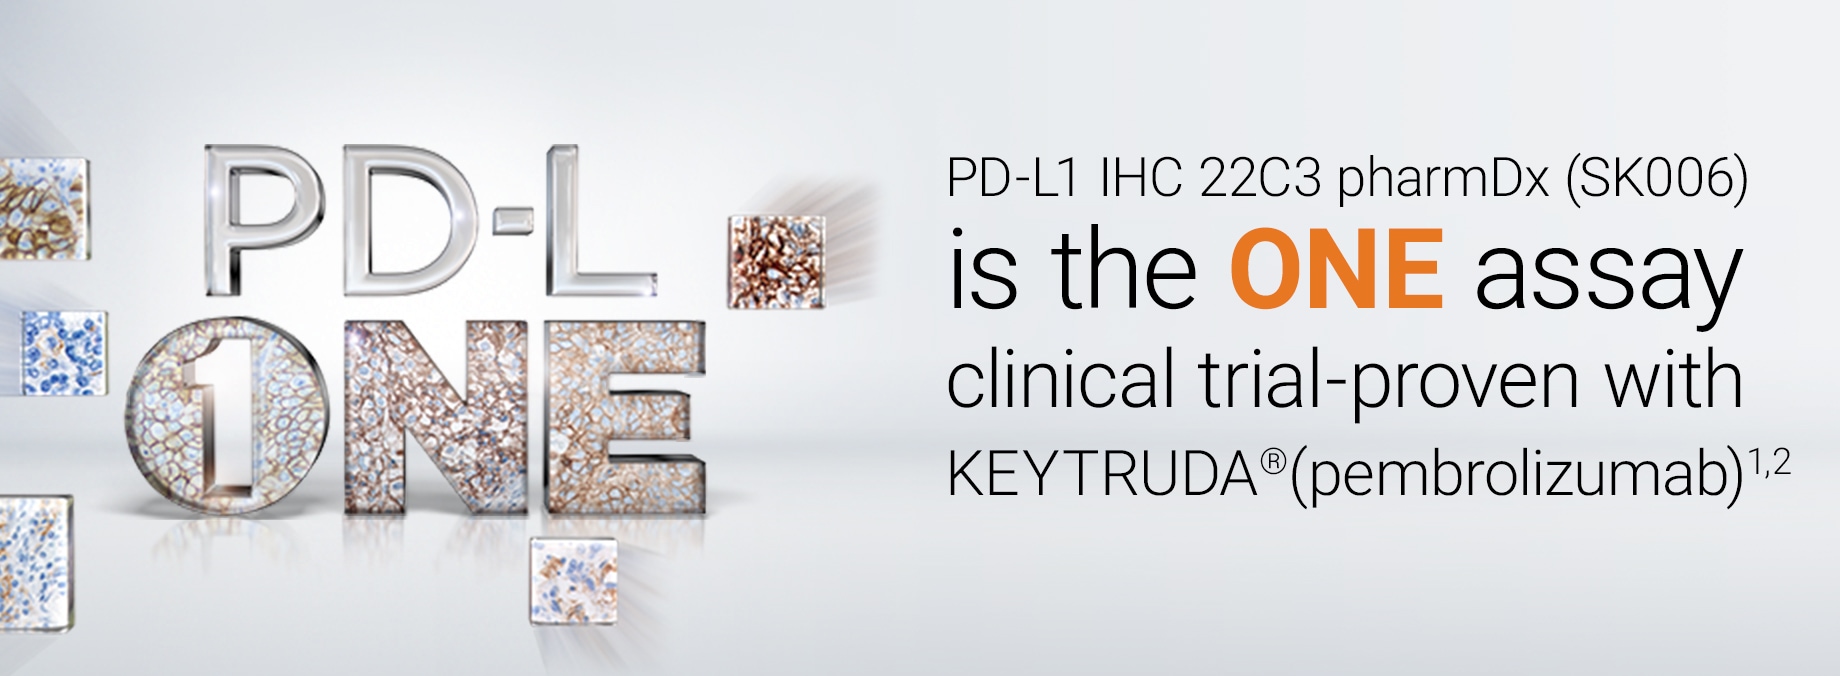 PD-L1 IHC 22C3 pharmDx (SK006) is the ONE assay clinical trial-proven with KEYTRUDA® (pembrolizumab)